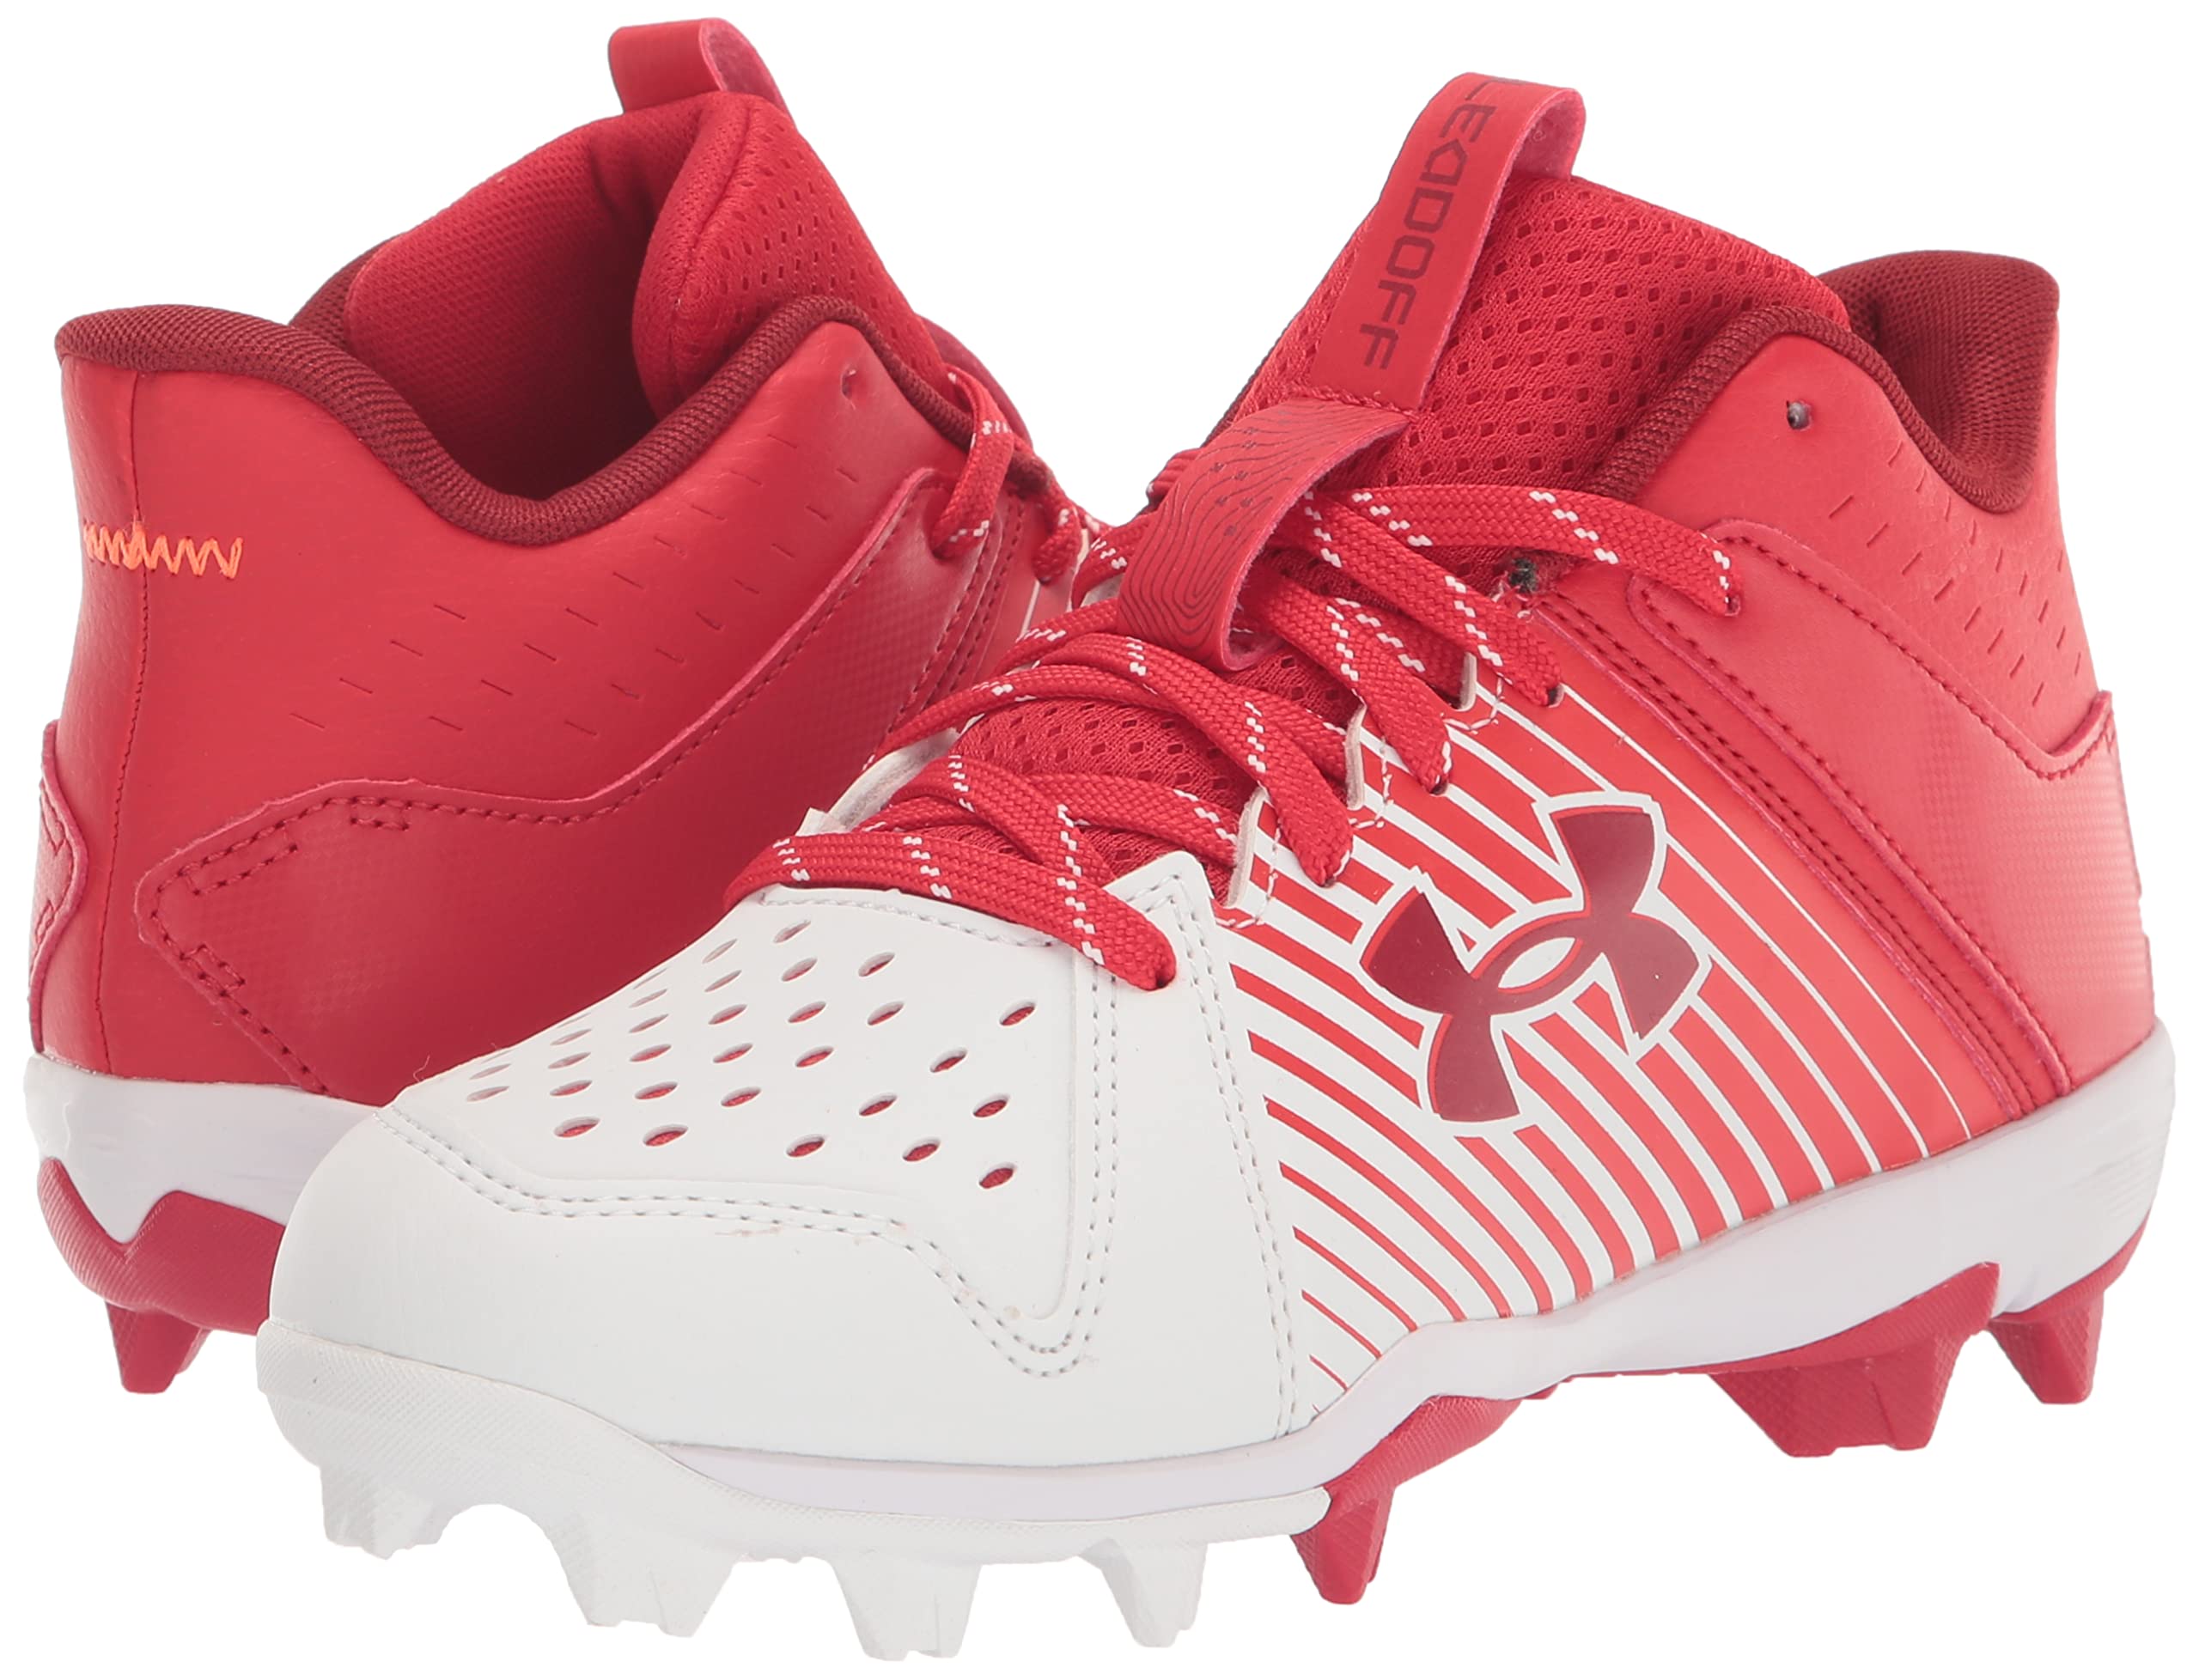 Under Armour Baby-Boy's Leadoff Mid Junior Rubber Molded Baseball Cleat Shoe